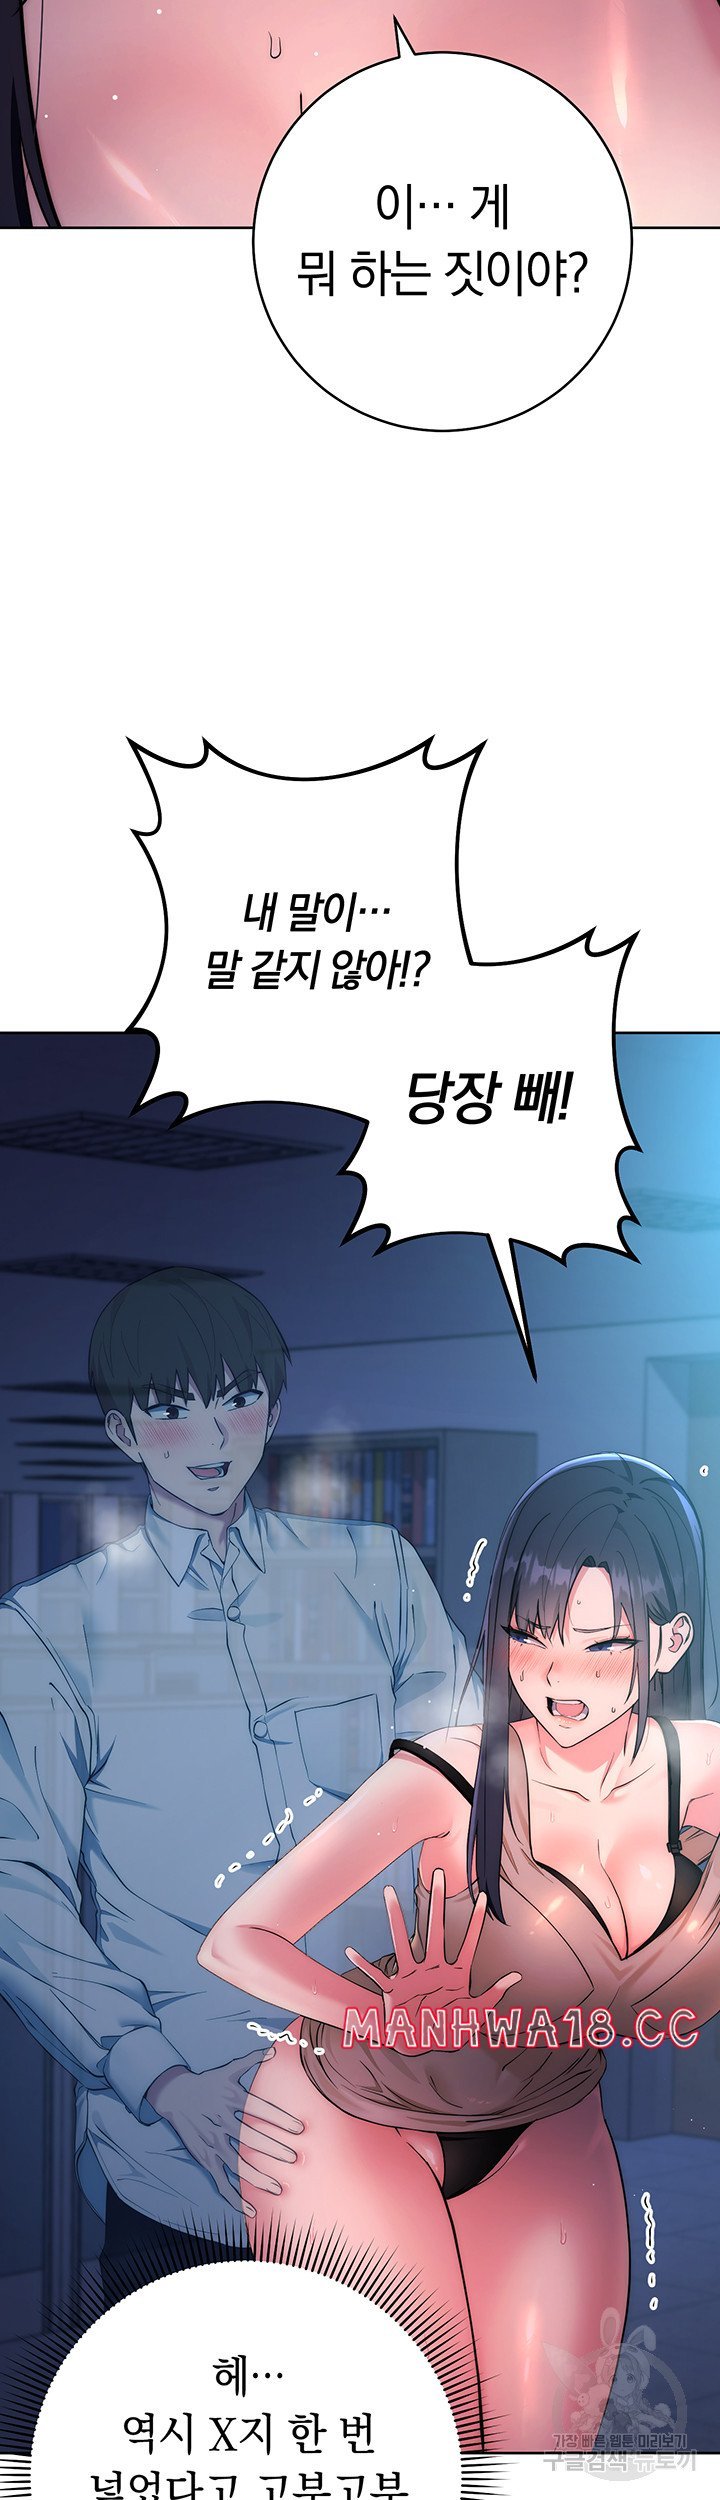 outsider-the-invisible-man-raw-chap-3-21